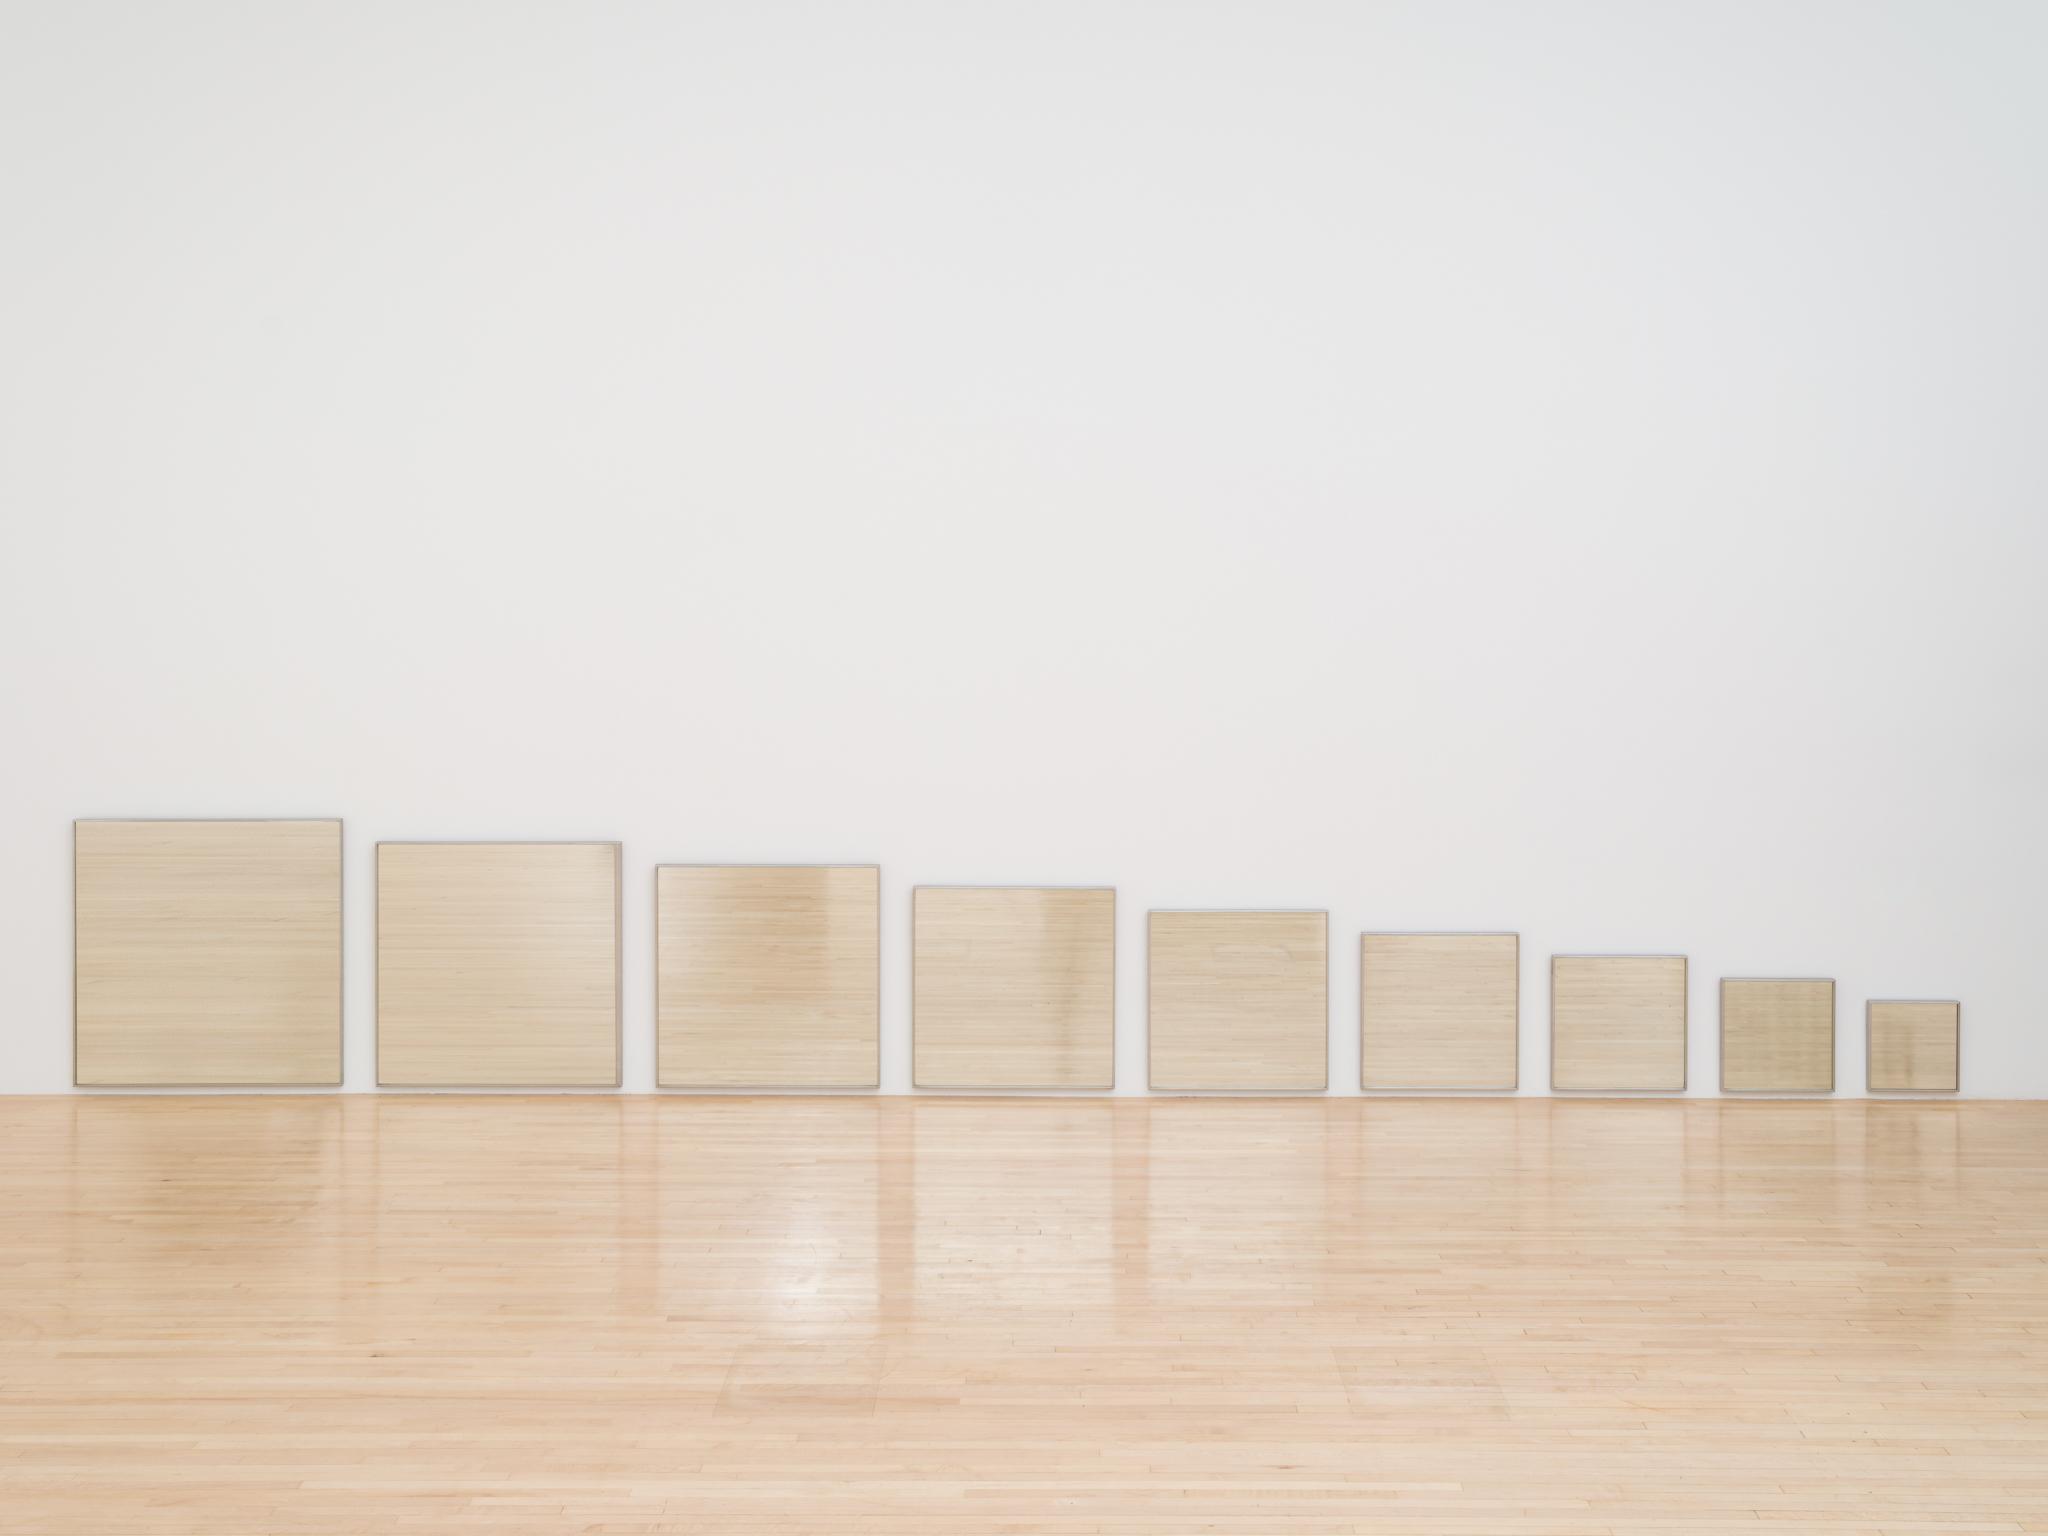 Robert Smithson's Mirage No. 1 on view. Nine mirrors hung near the floor reflecting the wooden floor.